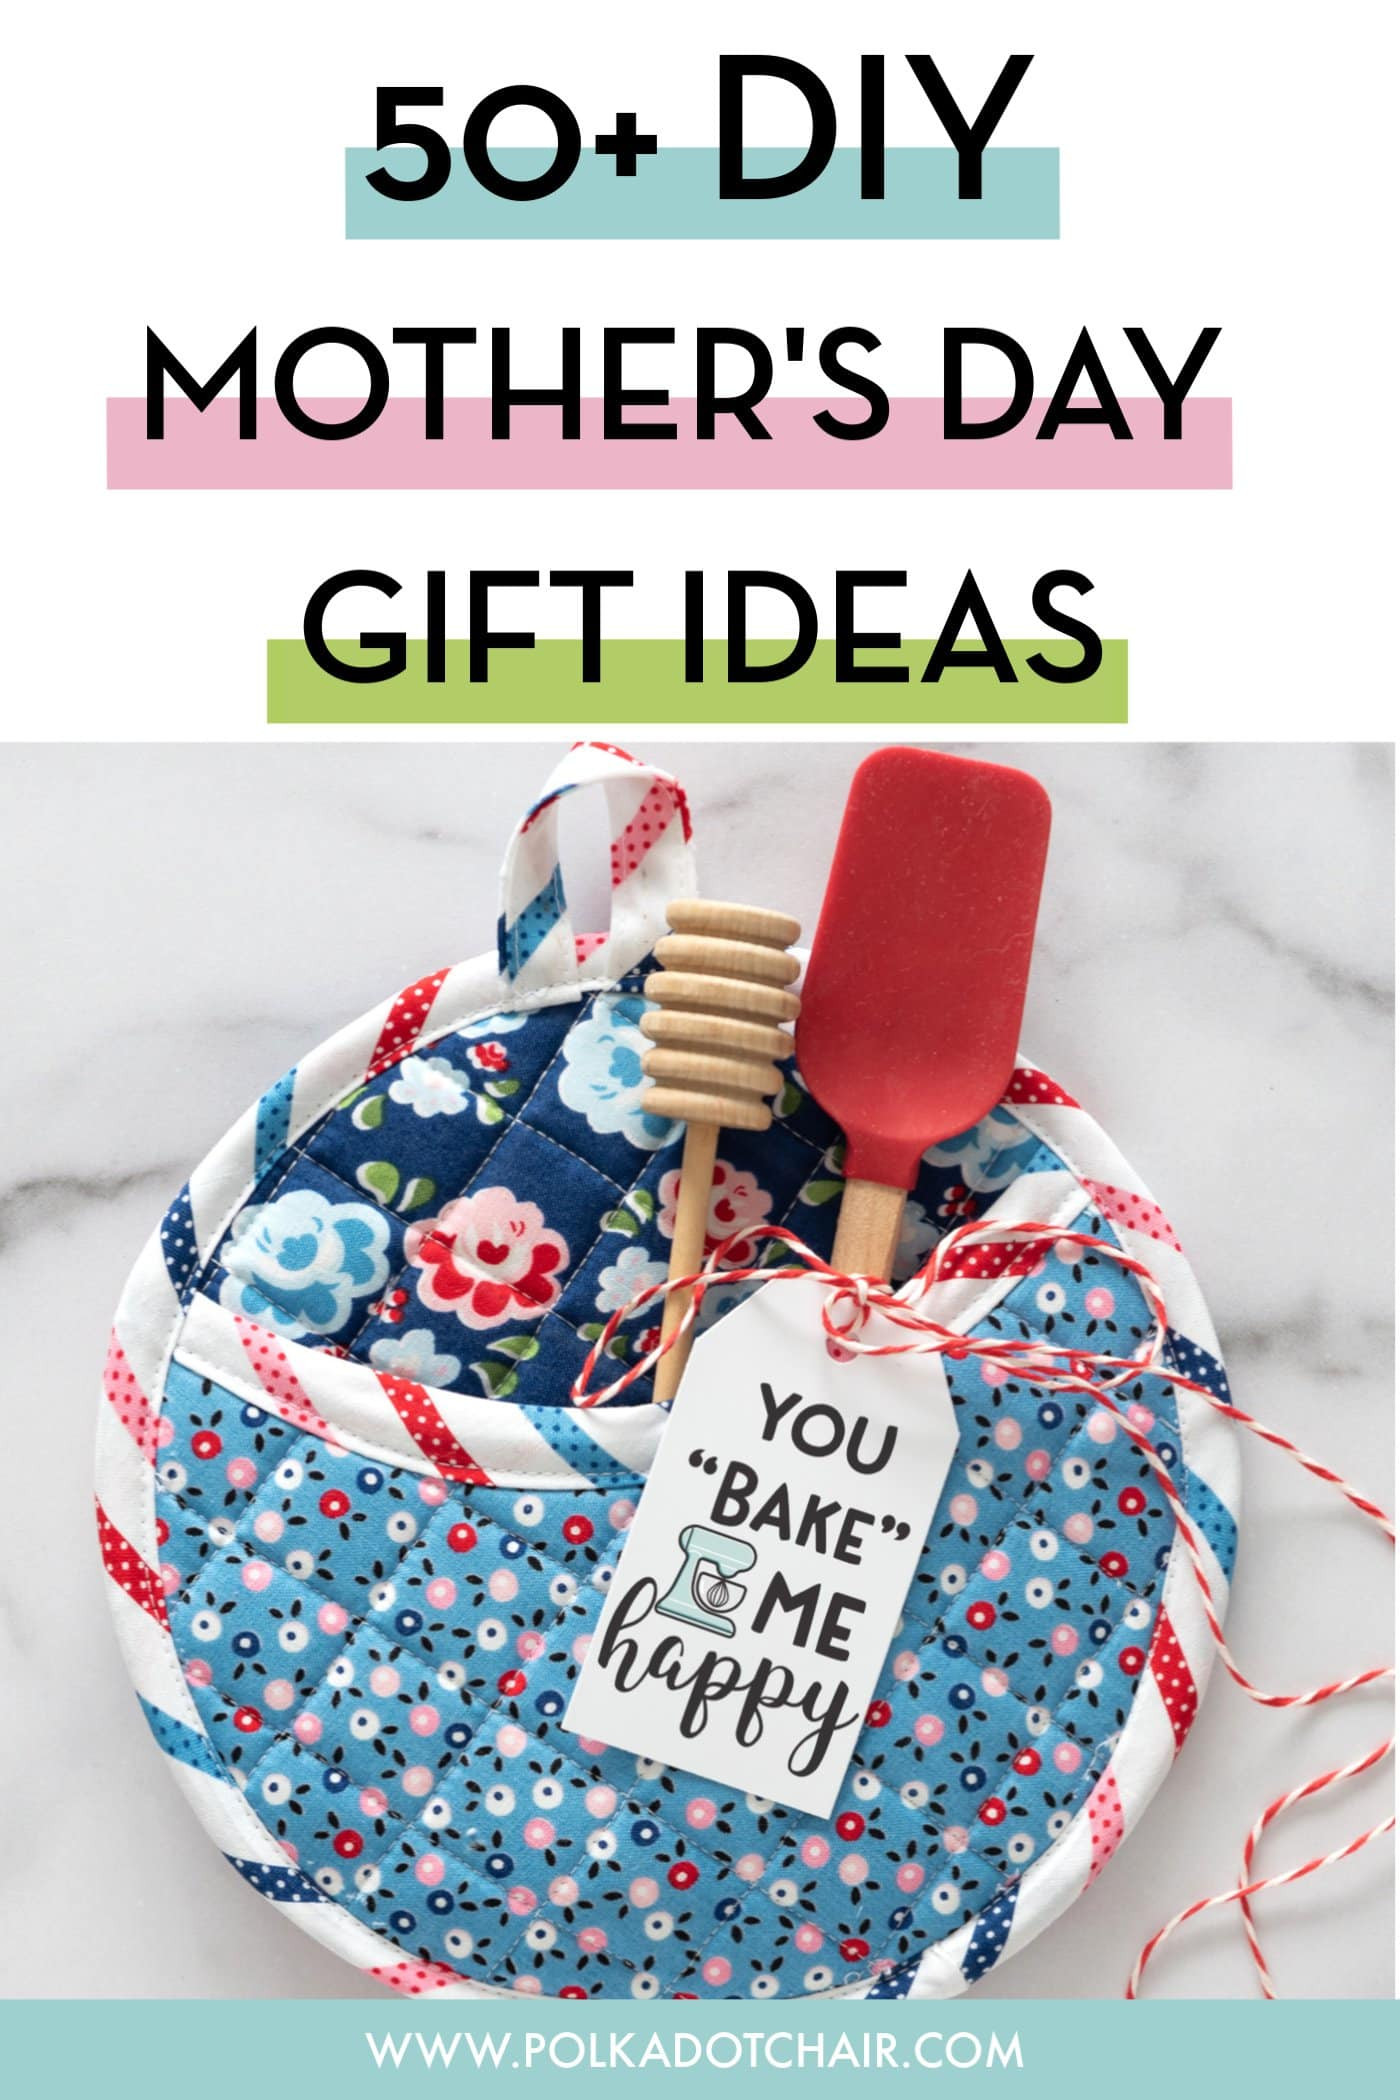 Mothersday Gift Ideas
 50 DIY Mother s Day Gift Ideas & Projects